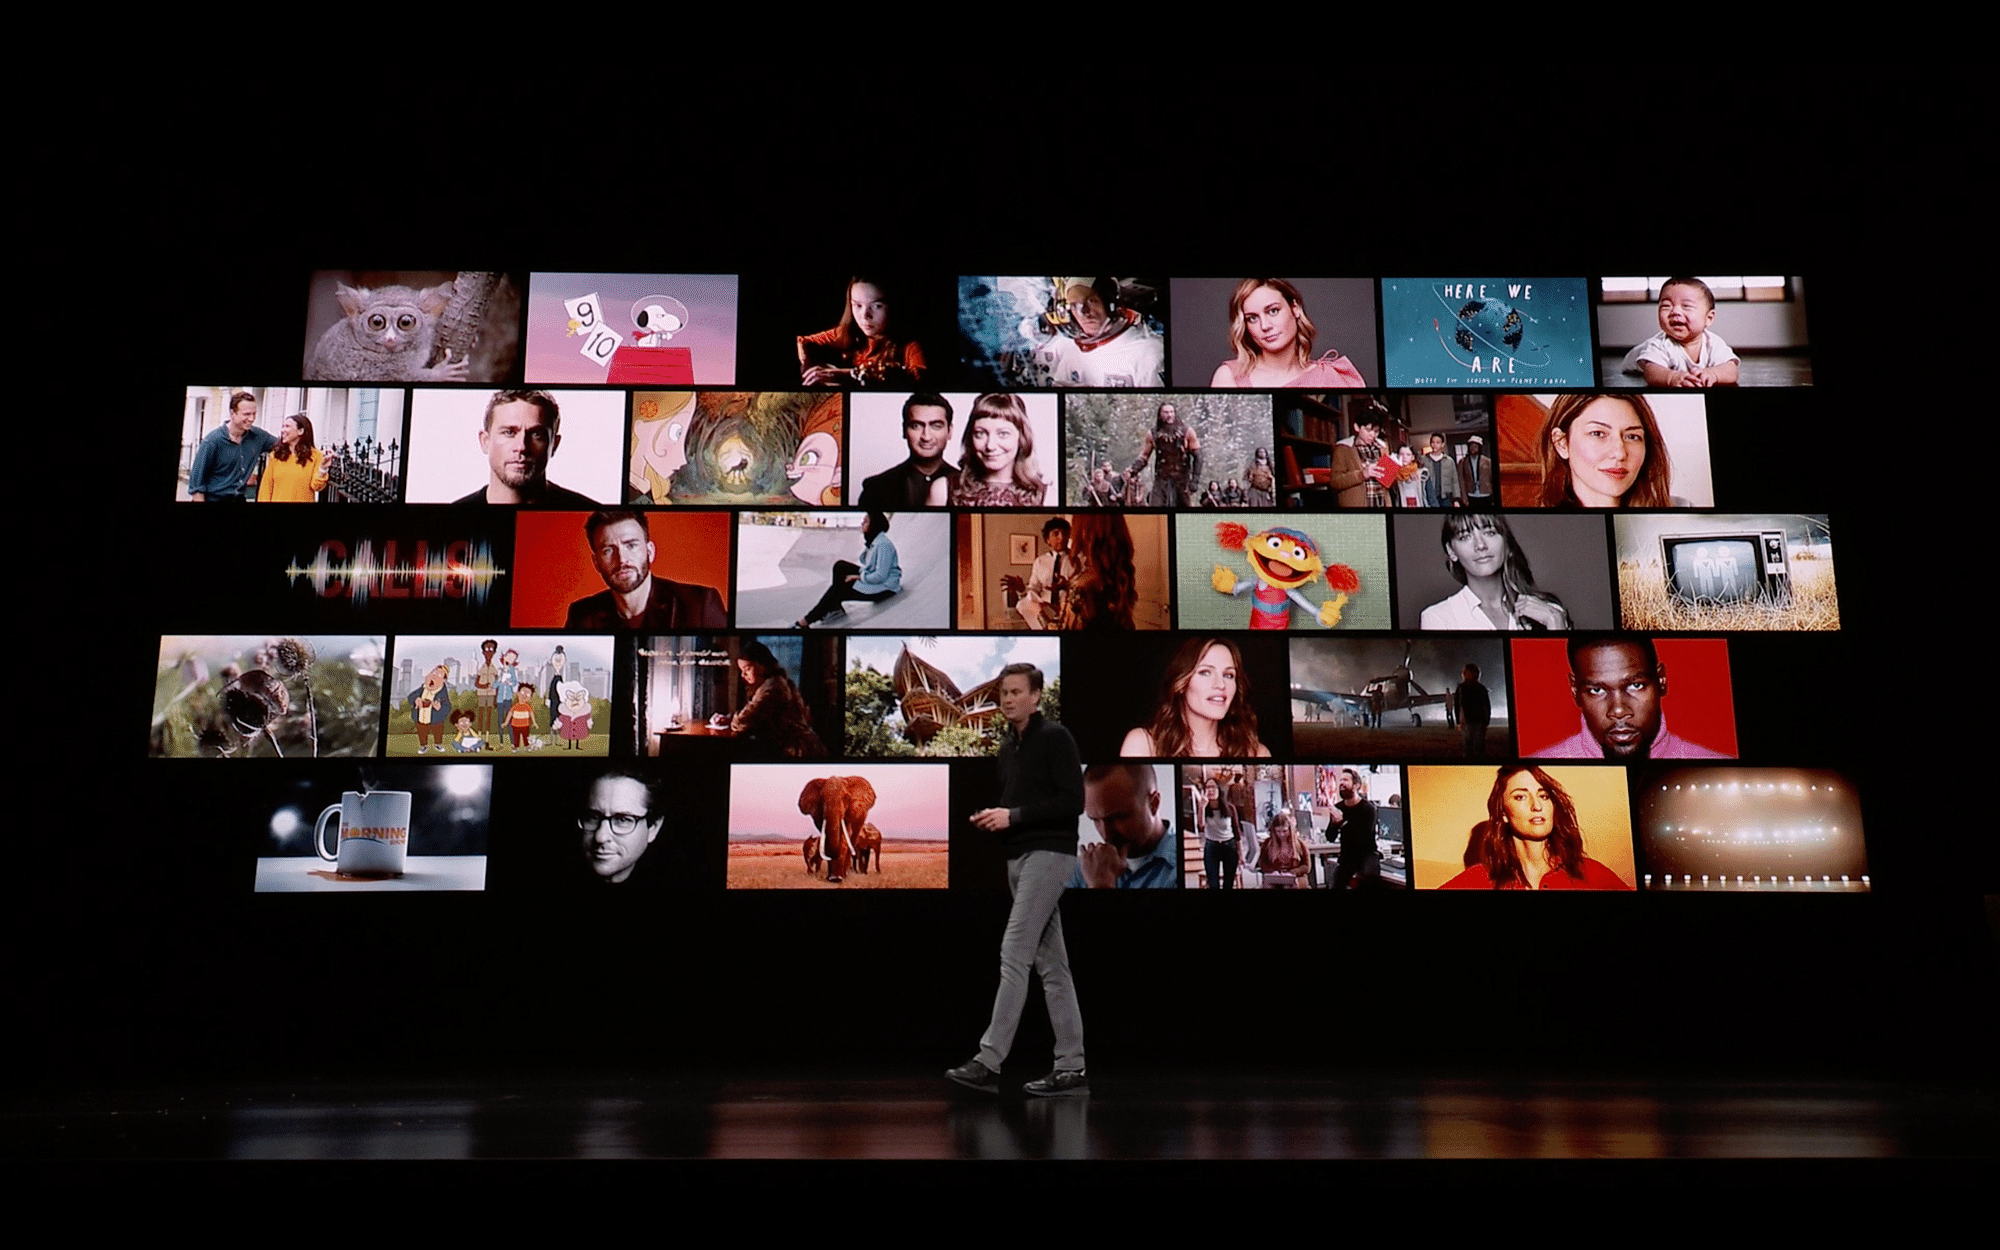 Apple TV Plus will be available in 100 countries.